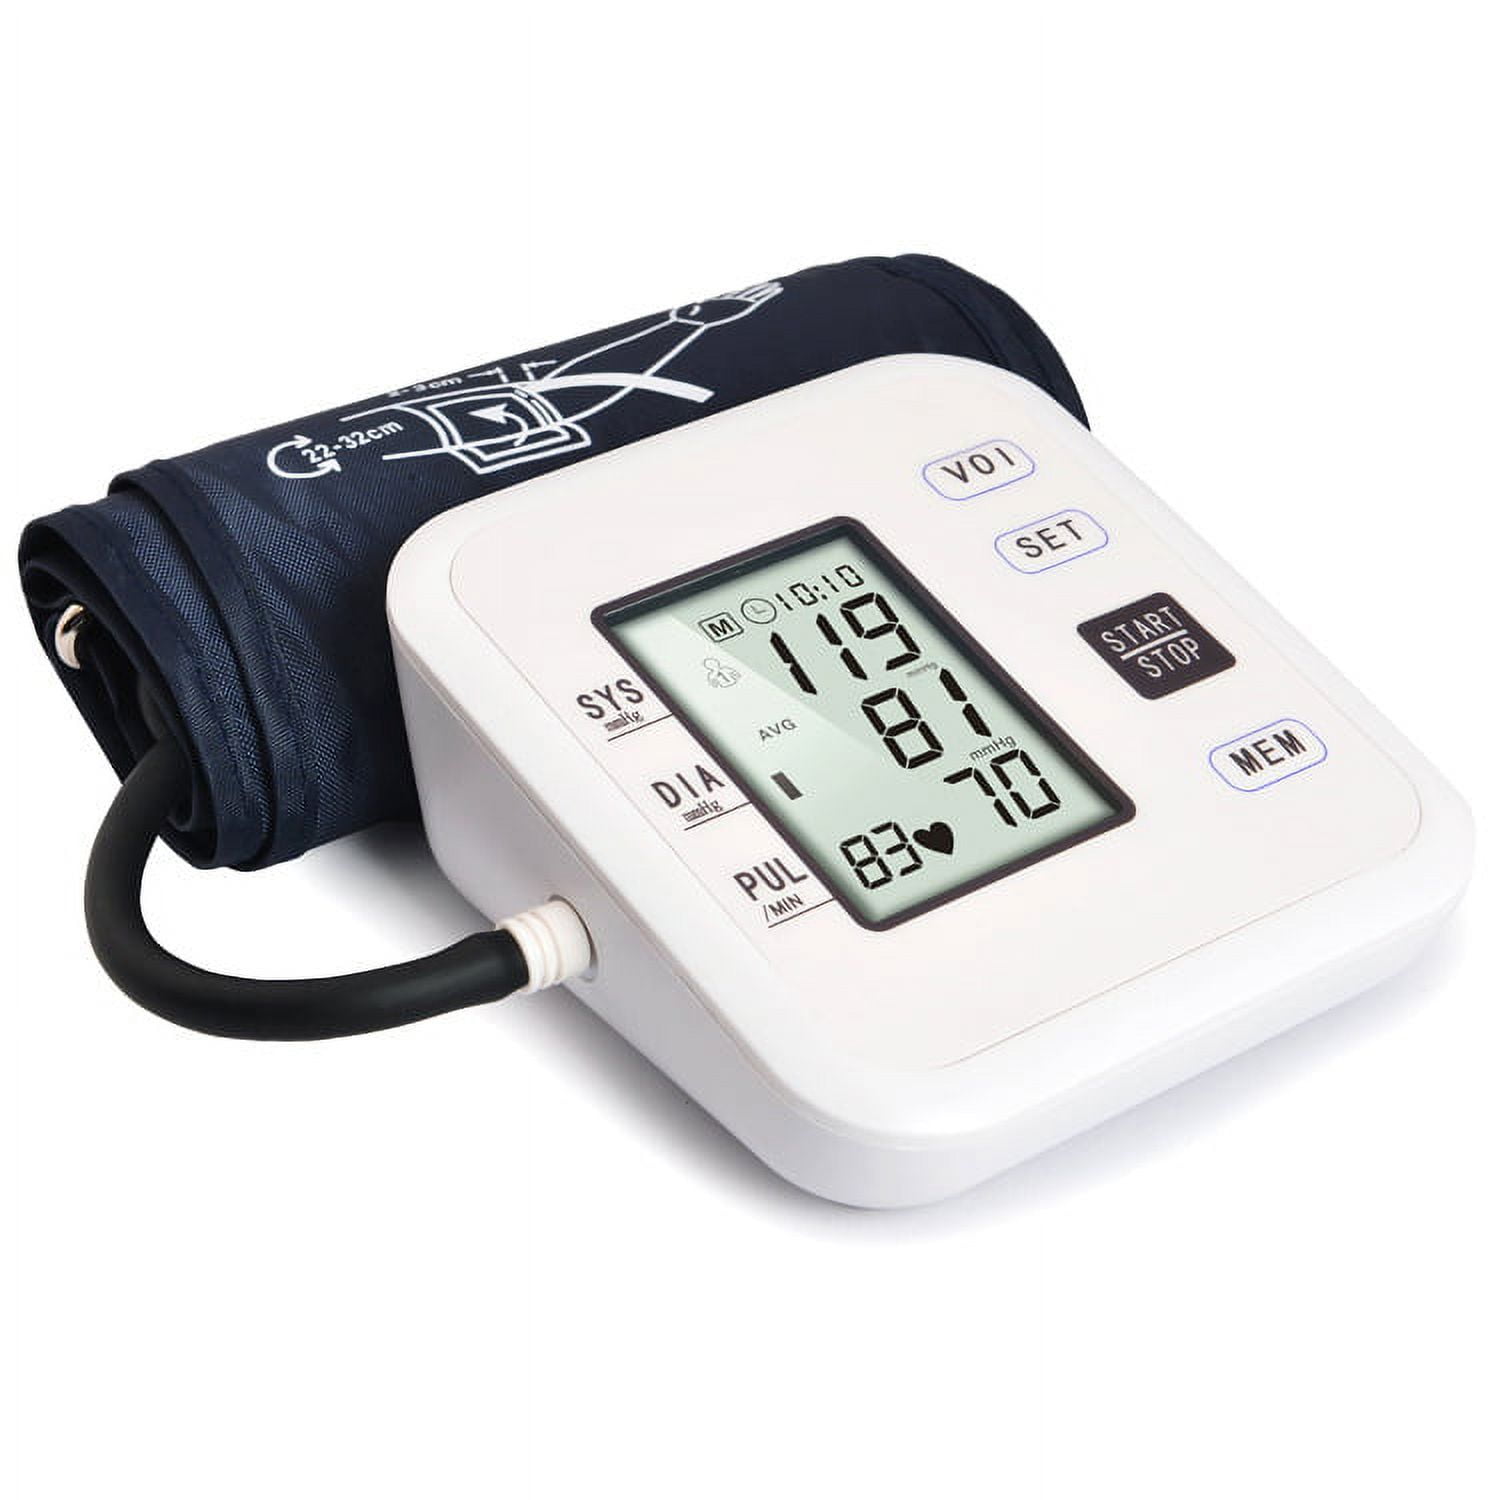 Meraw Bluetooth Blood Pressure Machine, High Accuracy Blood Pressure Cuff  Arm 8.7-16.5' with Irregular Heartbeat Monitoring, Unlimited Memories in  APP, 4 AAA Batteries